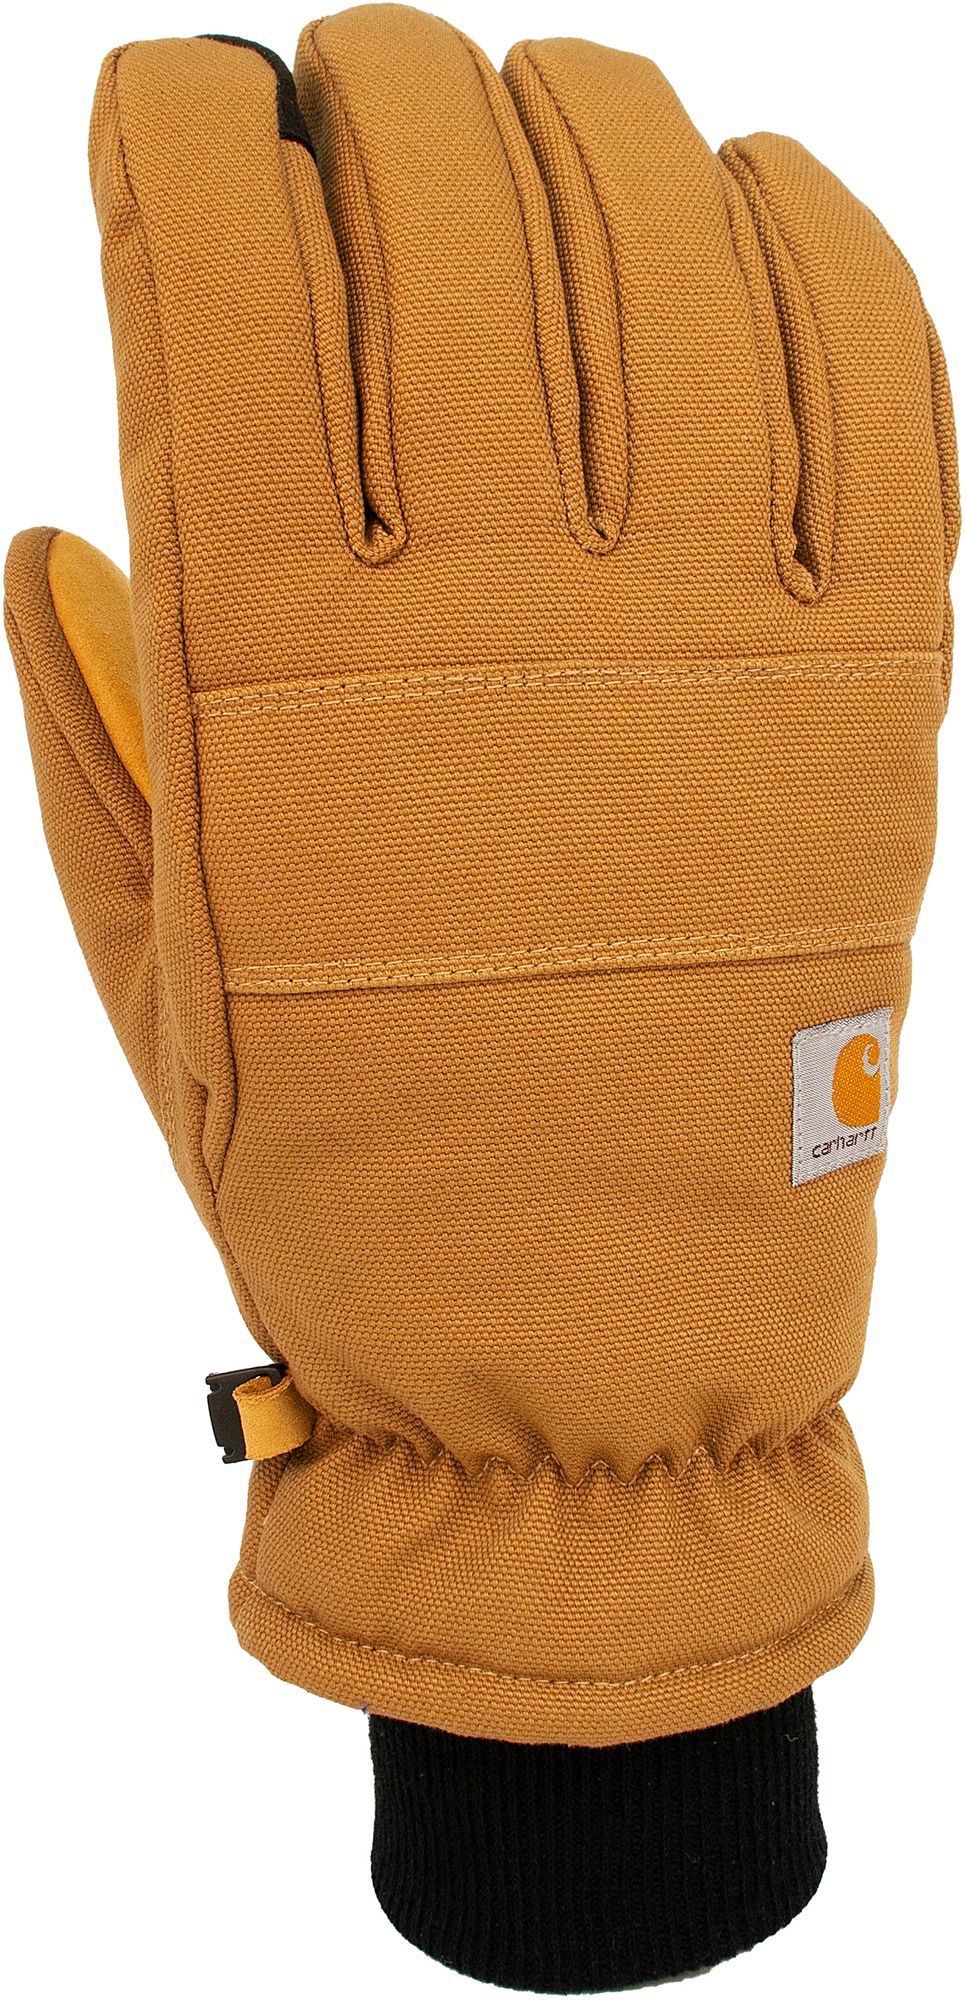 Carhartt Mens Insulated Duck Synthetic Leather Knit Cuff Gloves